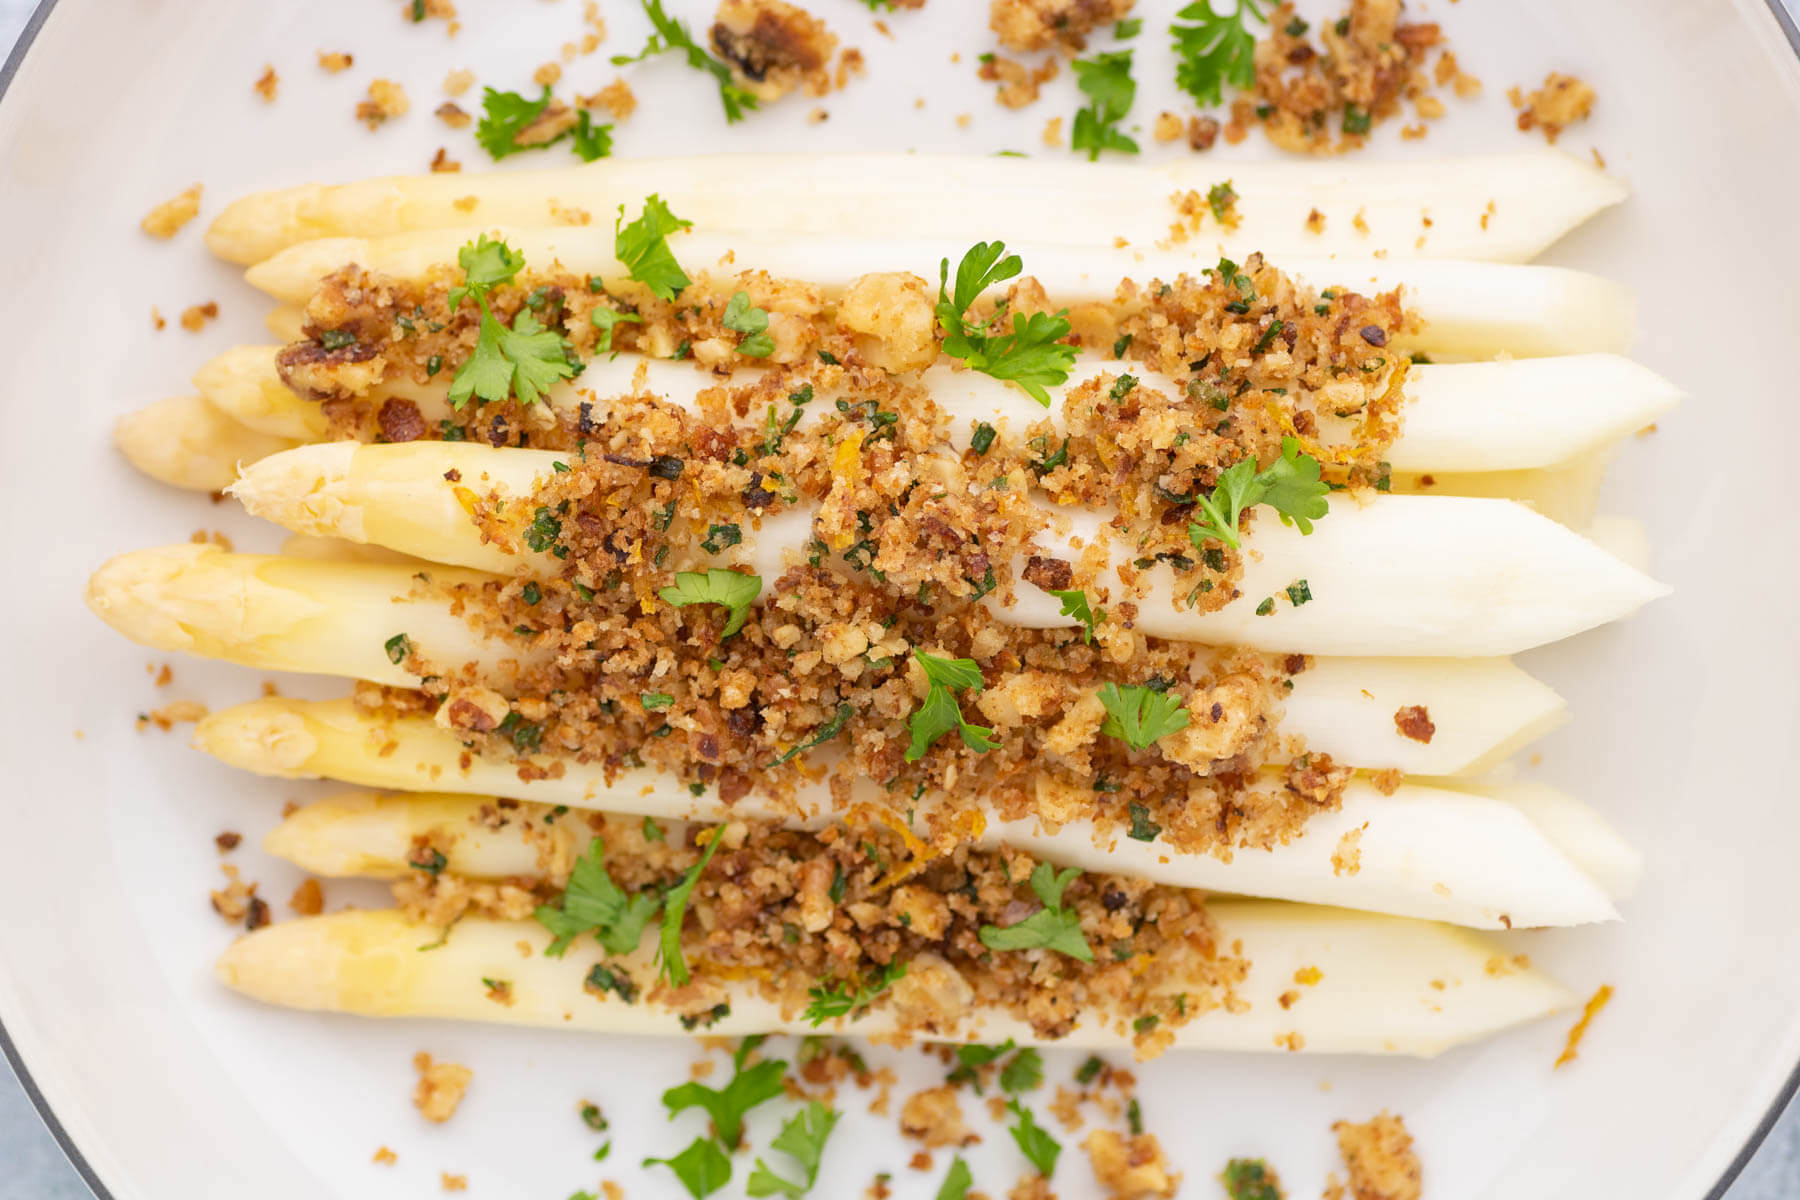 Steamed white asparagus covered in golden pangrattato and herbs.